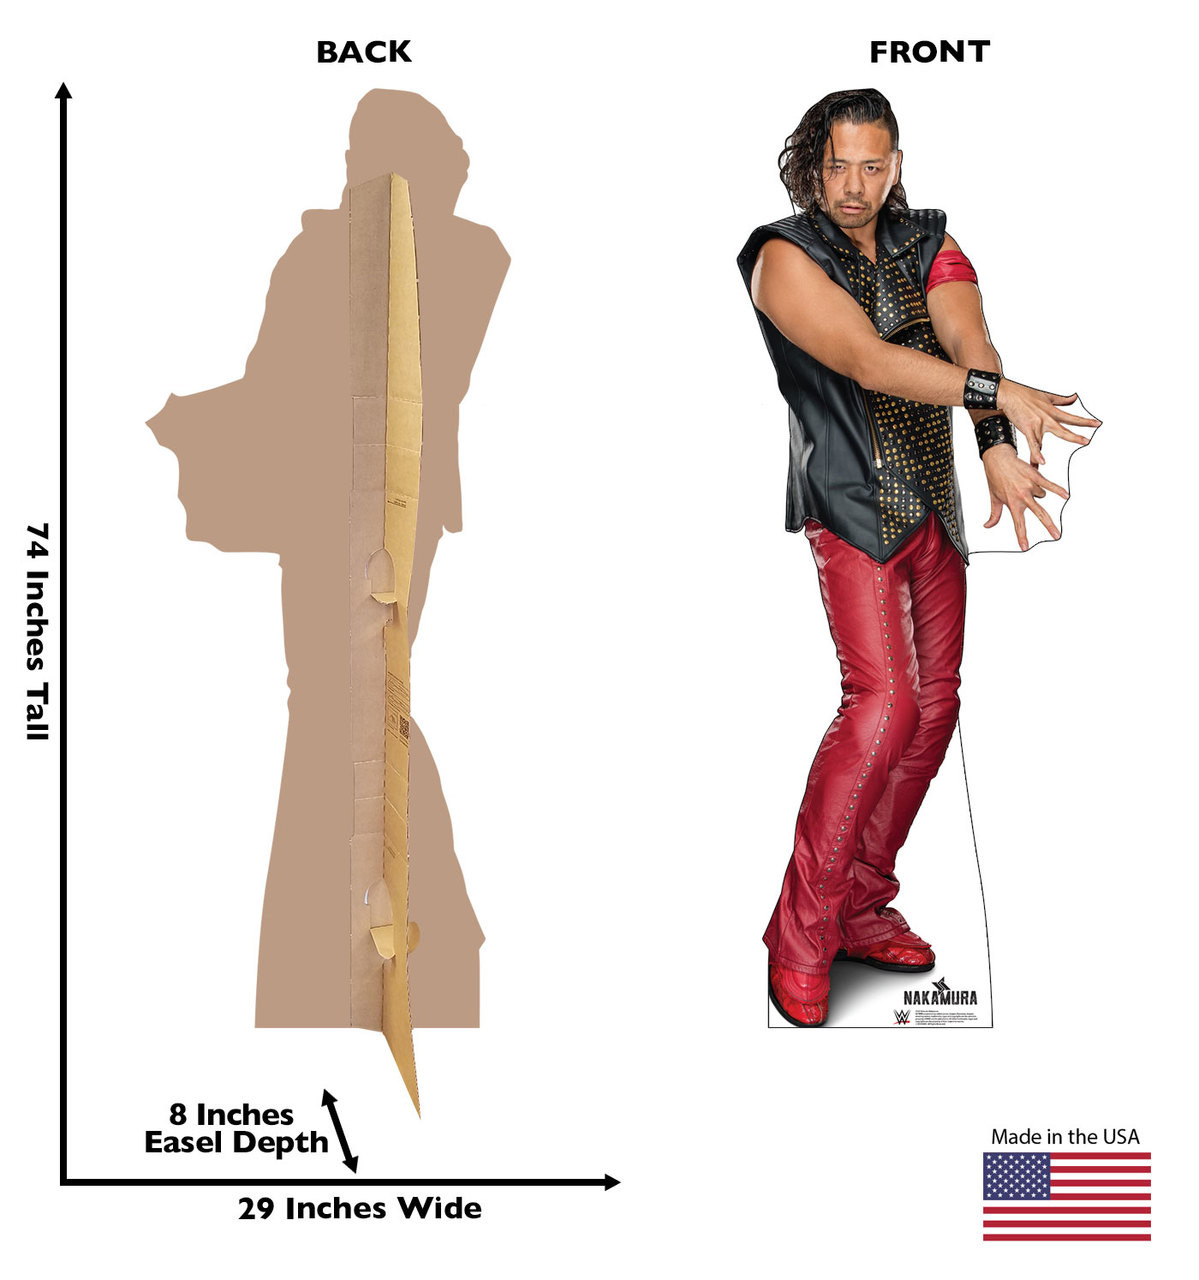 Shinsuke Nakamura Life-size cardboard standee front and back with dimensions.